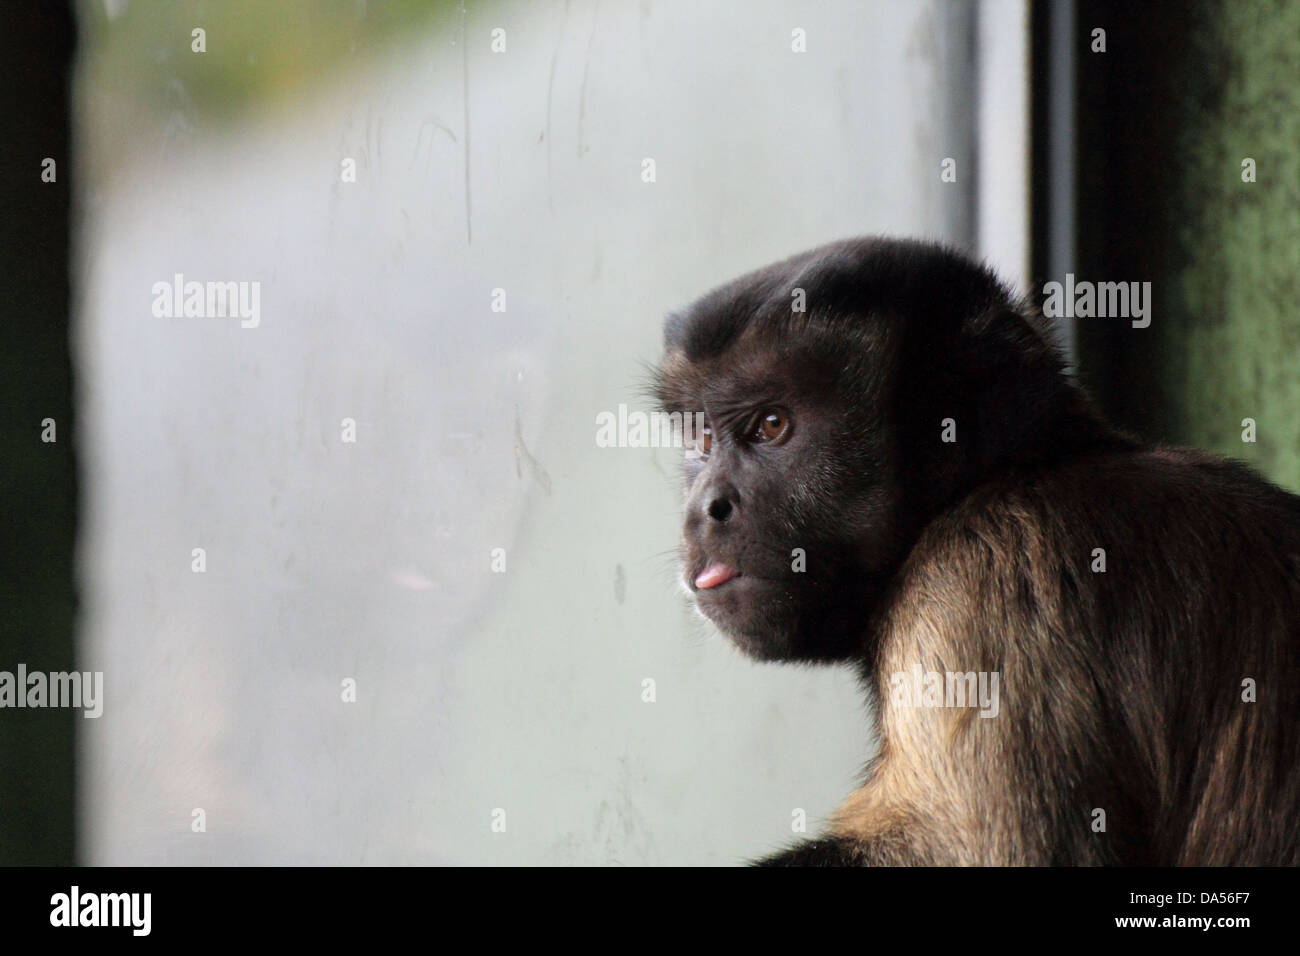 Brown Capuchin (Cebus apella) Monkey staring out the window with tongue out Stock Photo